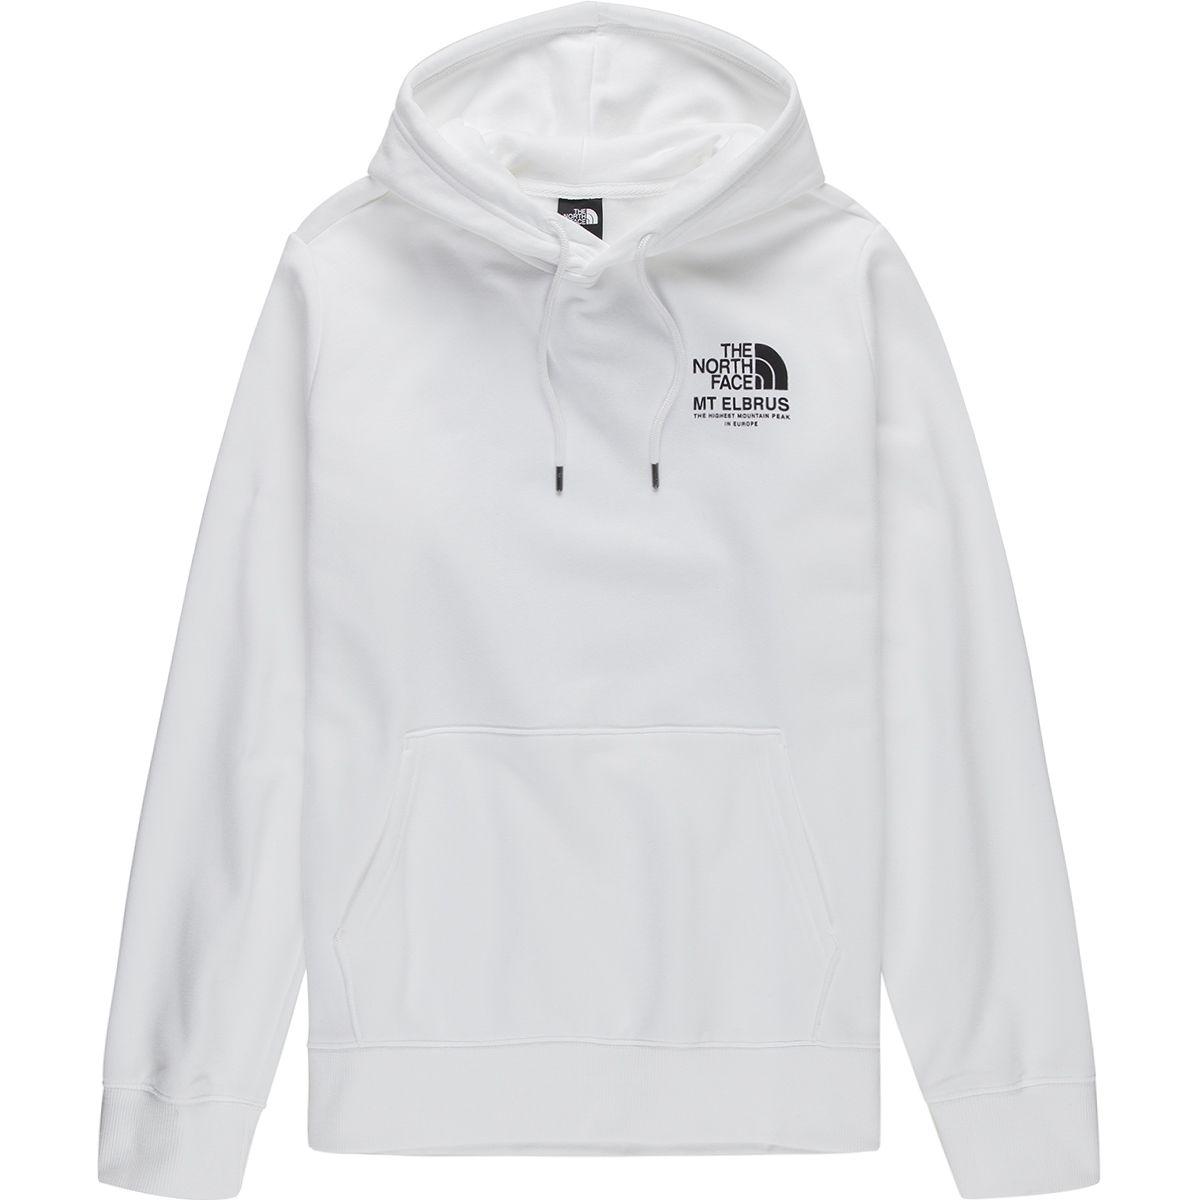 The North Face Cotton Highest Peaks Pullover Hoodie in White for Men - Lyst